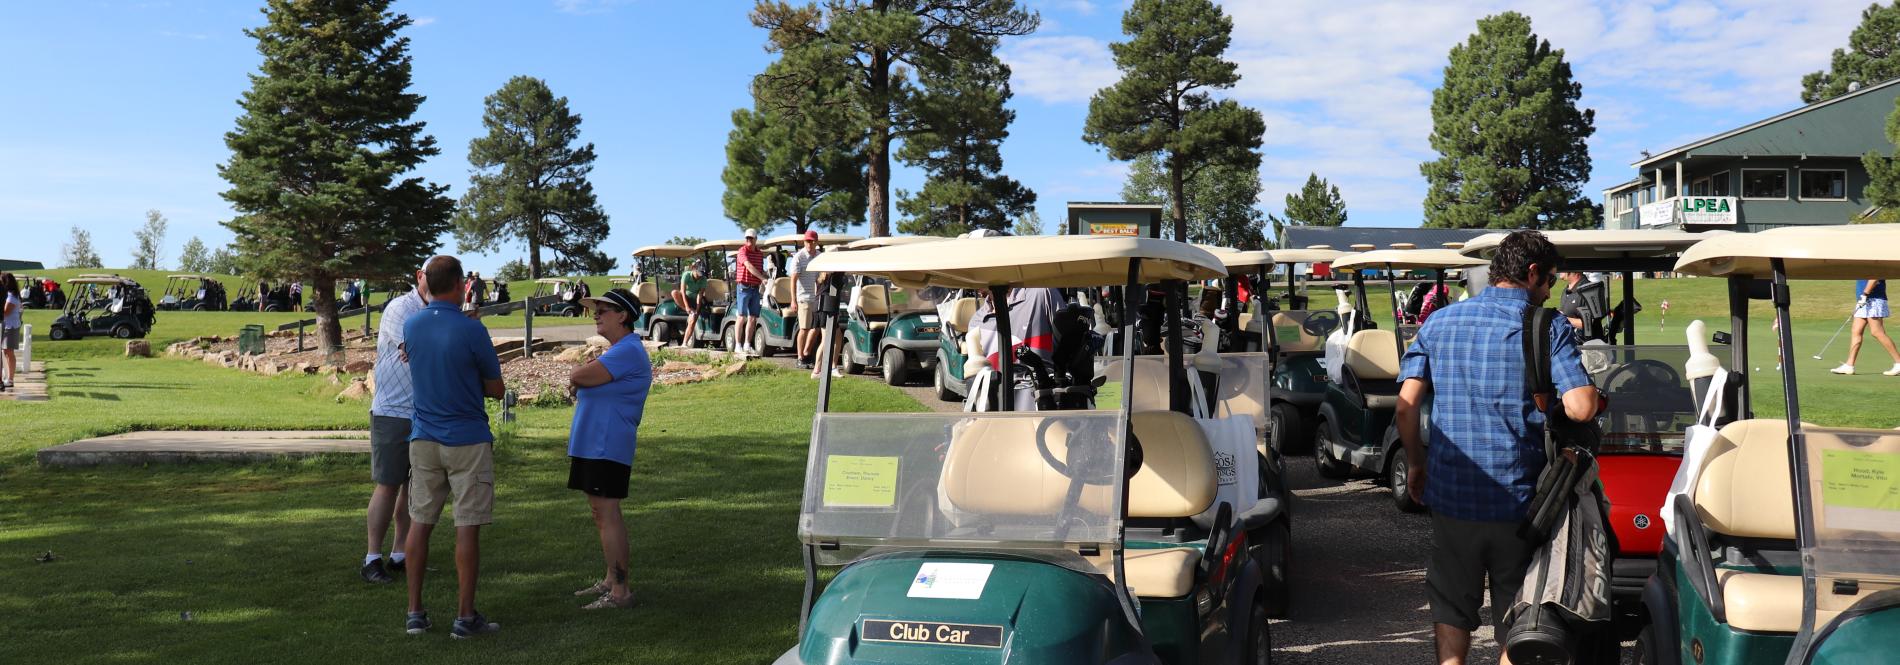 LPEA Golf Tournament set for June 15 at Pagosa Springs Golf Club